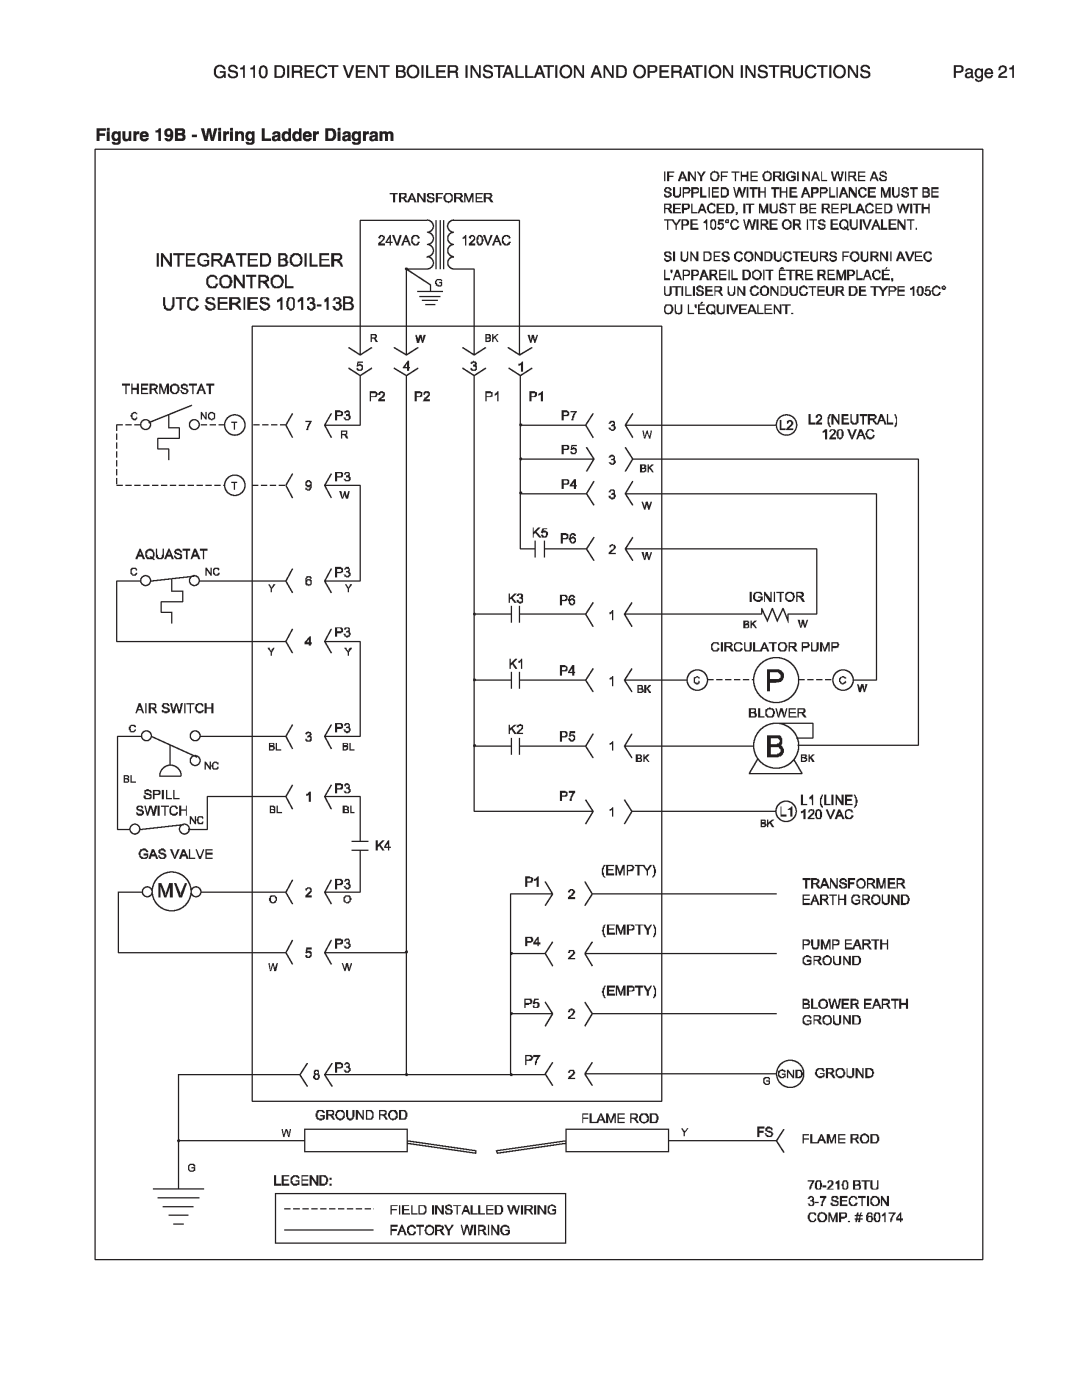 Smith Cast Iron Boilers GS110W operation manual B - Wiring Ladder Diagram 